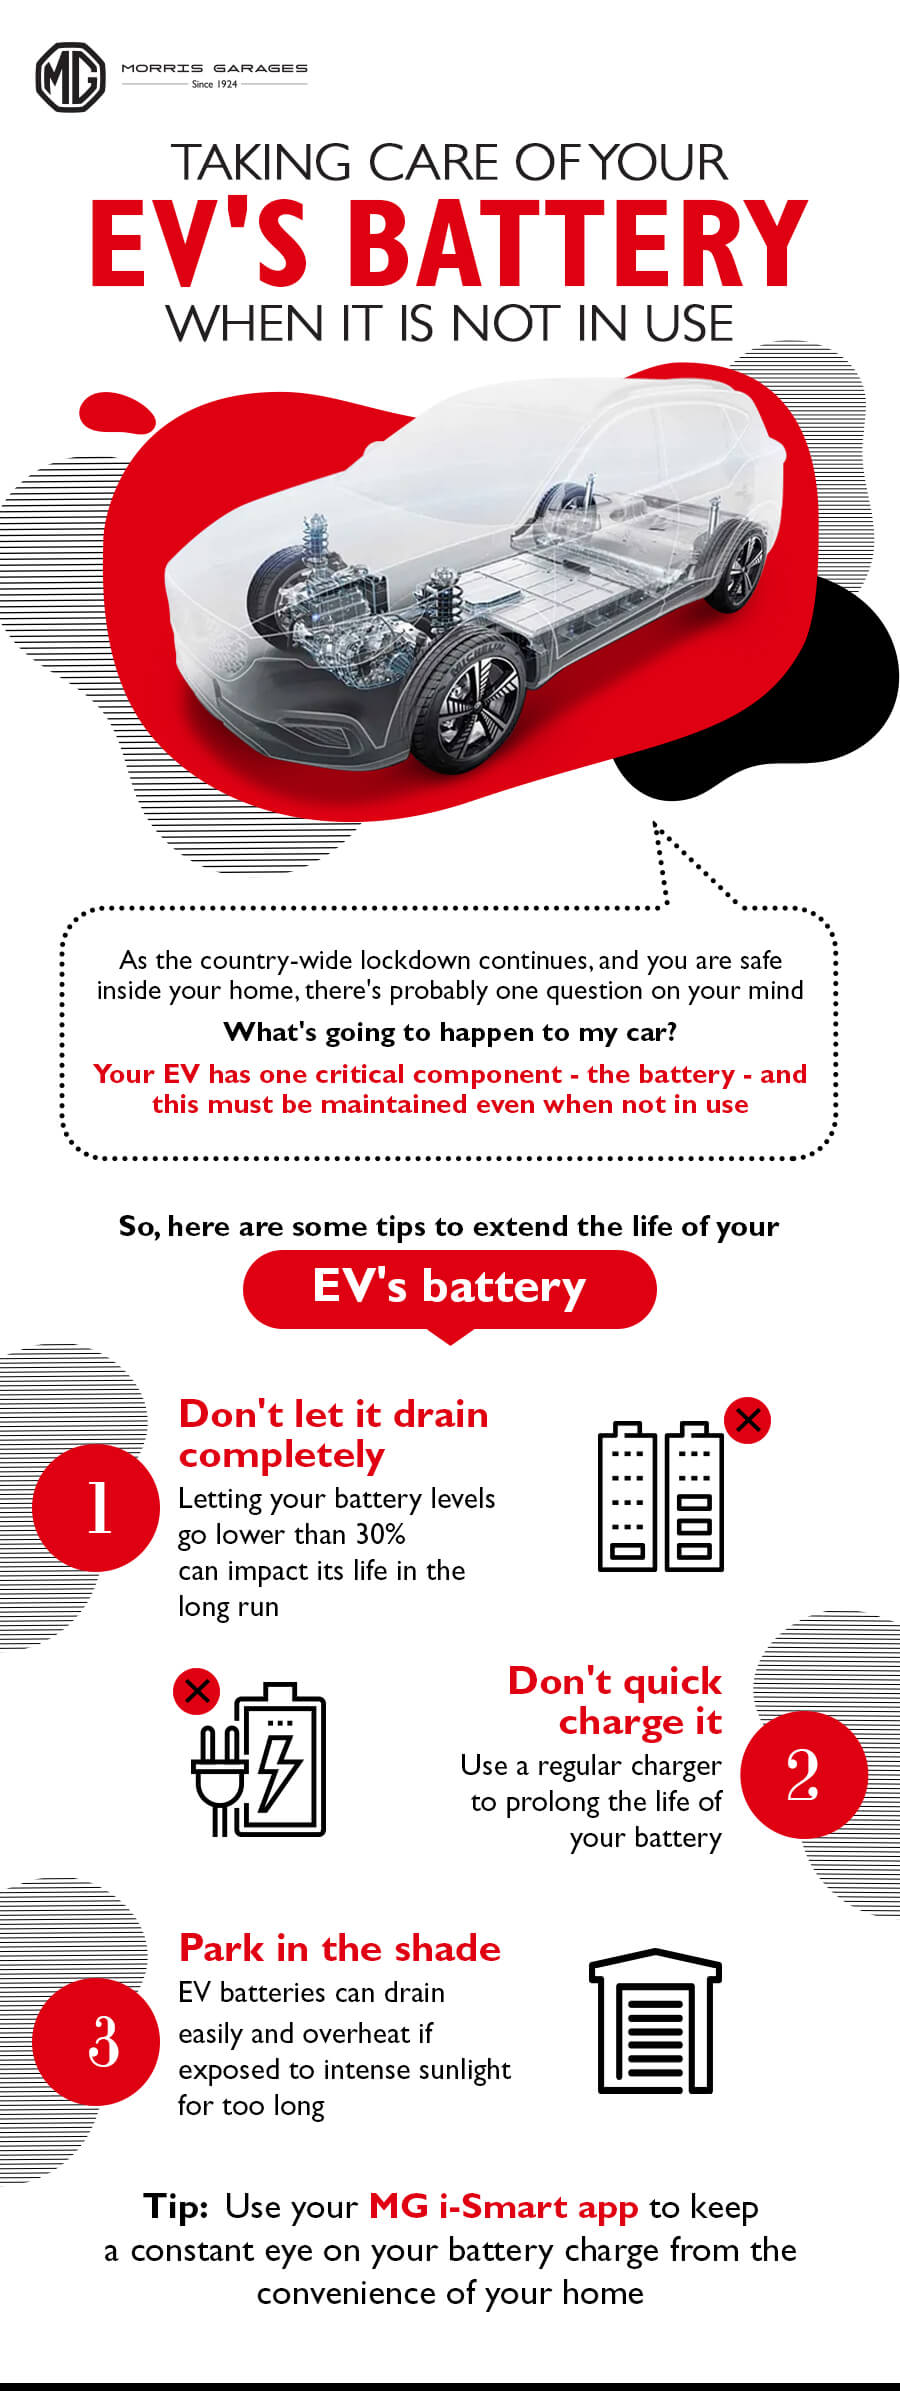 Taking care of your EV's battery